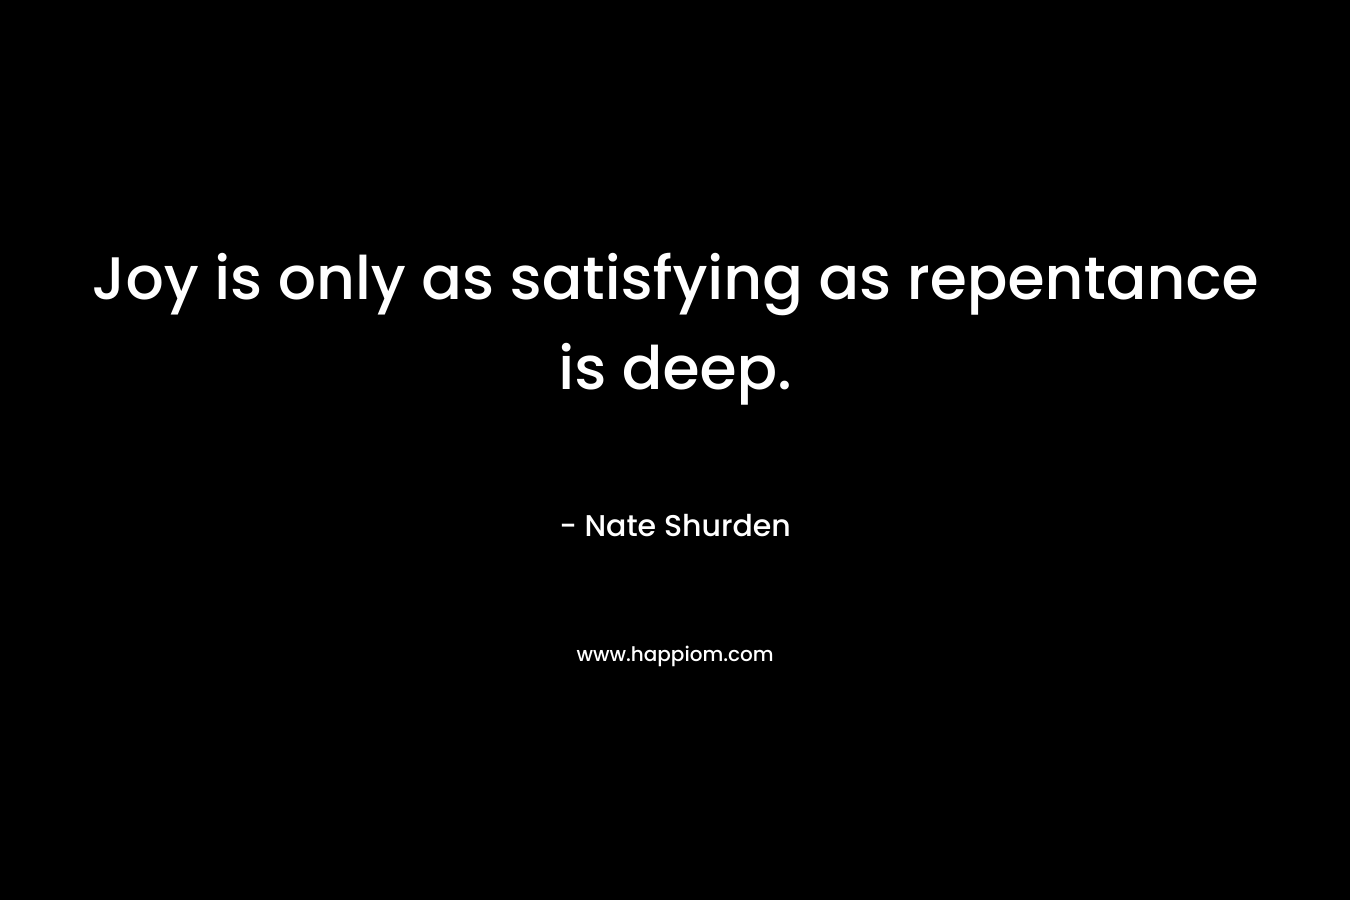 Joy is only as satisfying as repentance is deep. – Nate Shurden